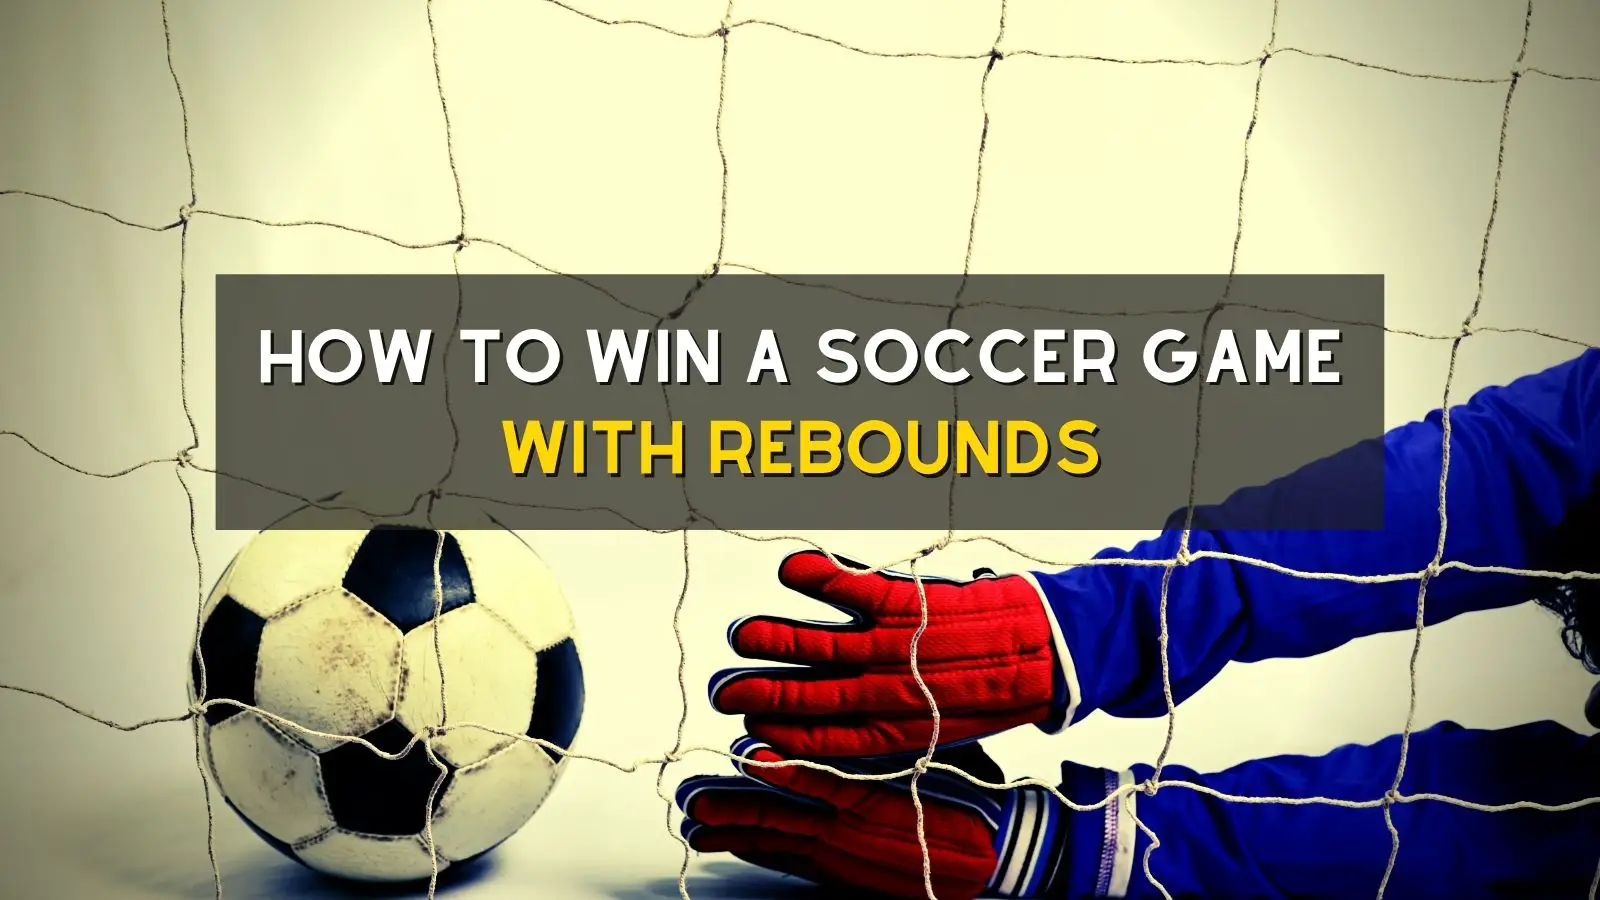 How To Win A Soccer Game With Rebounds